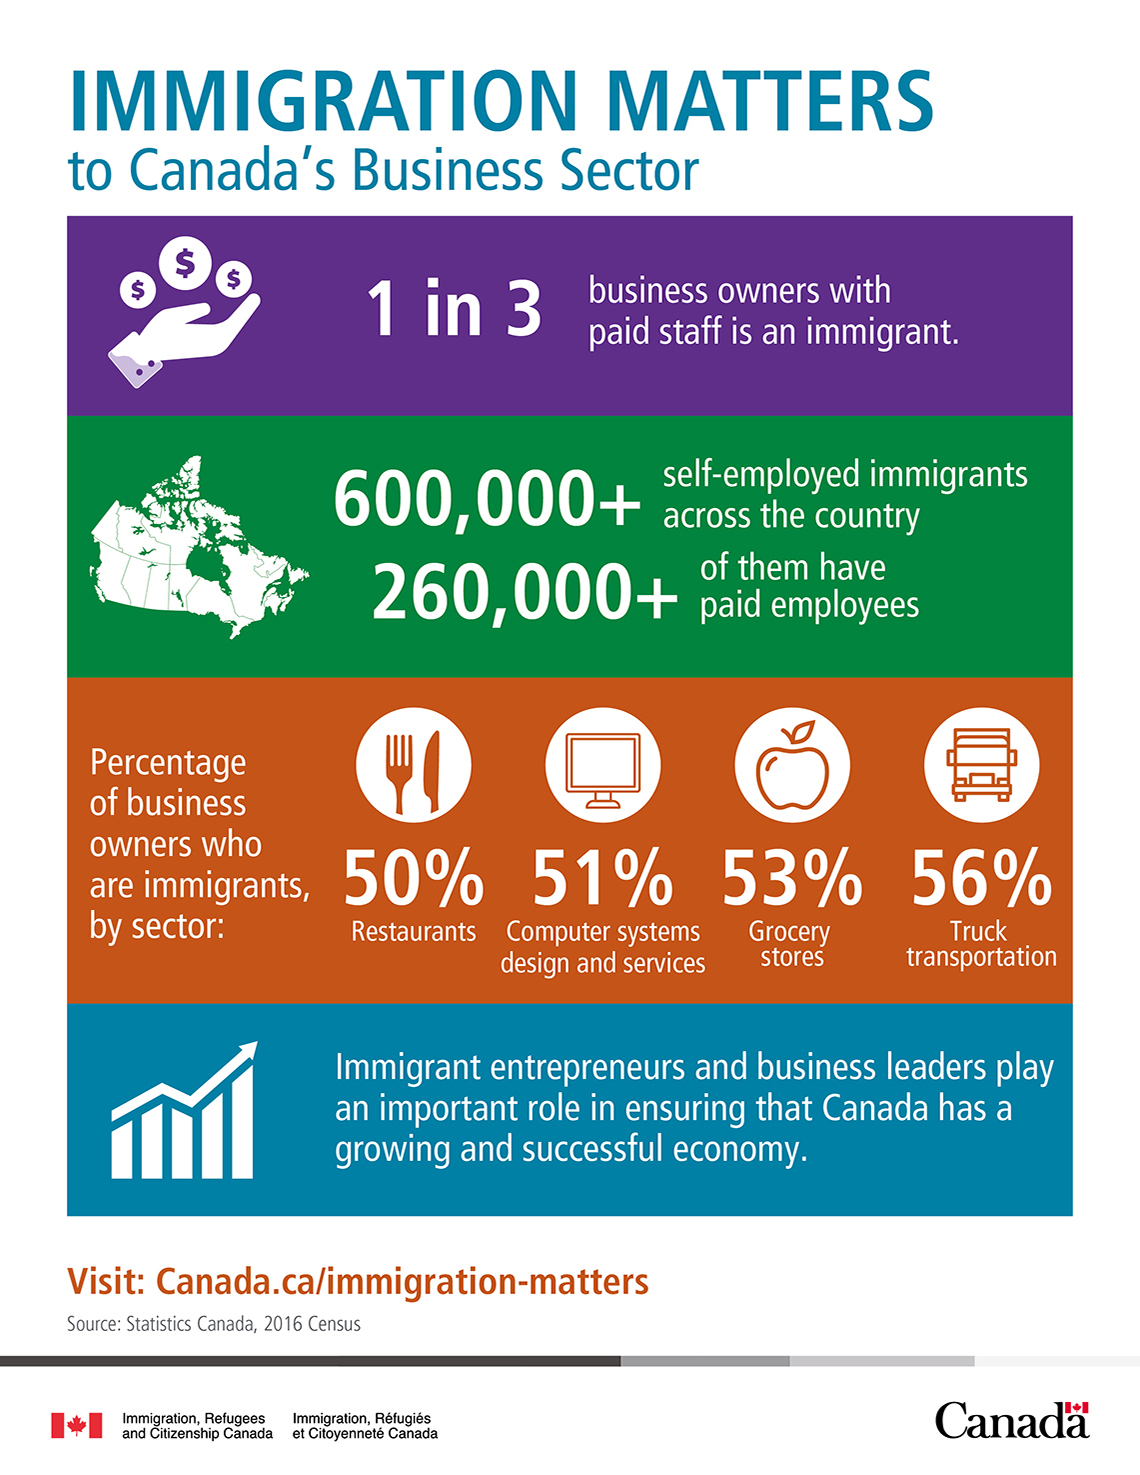 Immigration matters to Canadian business sector